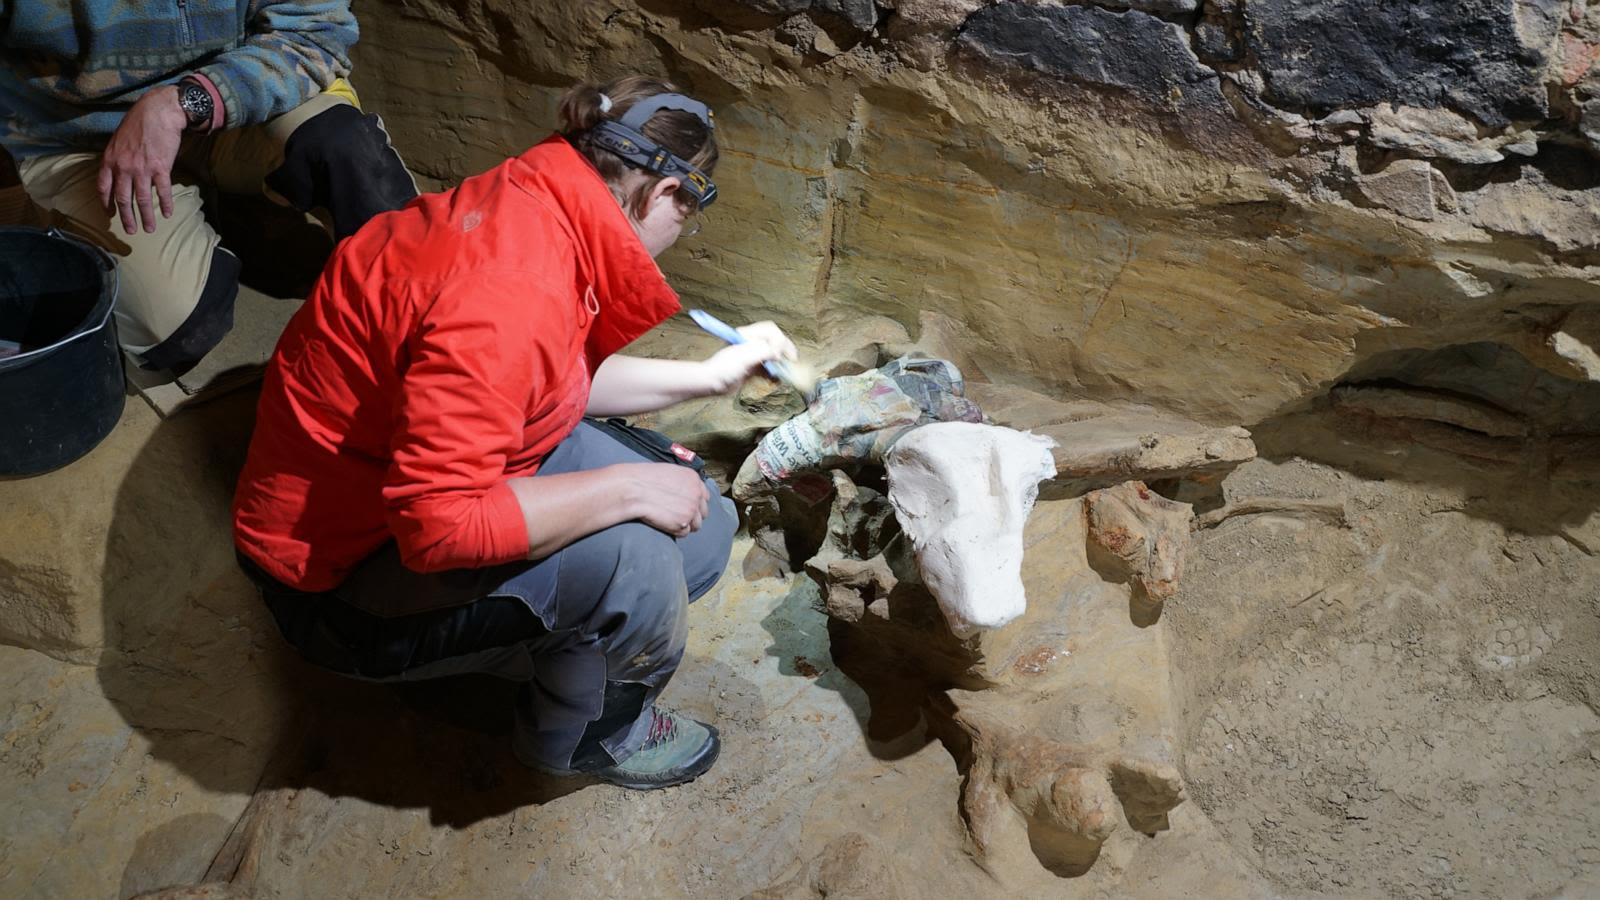 40,000-year-old mammoth bones discovered in wine cellar